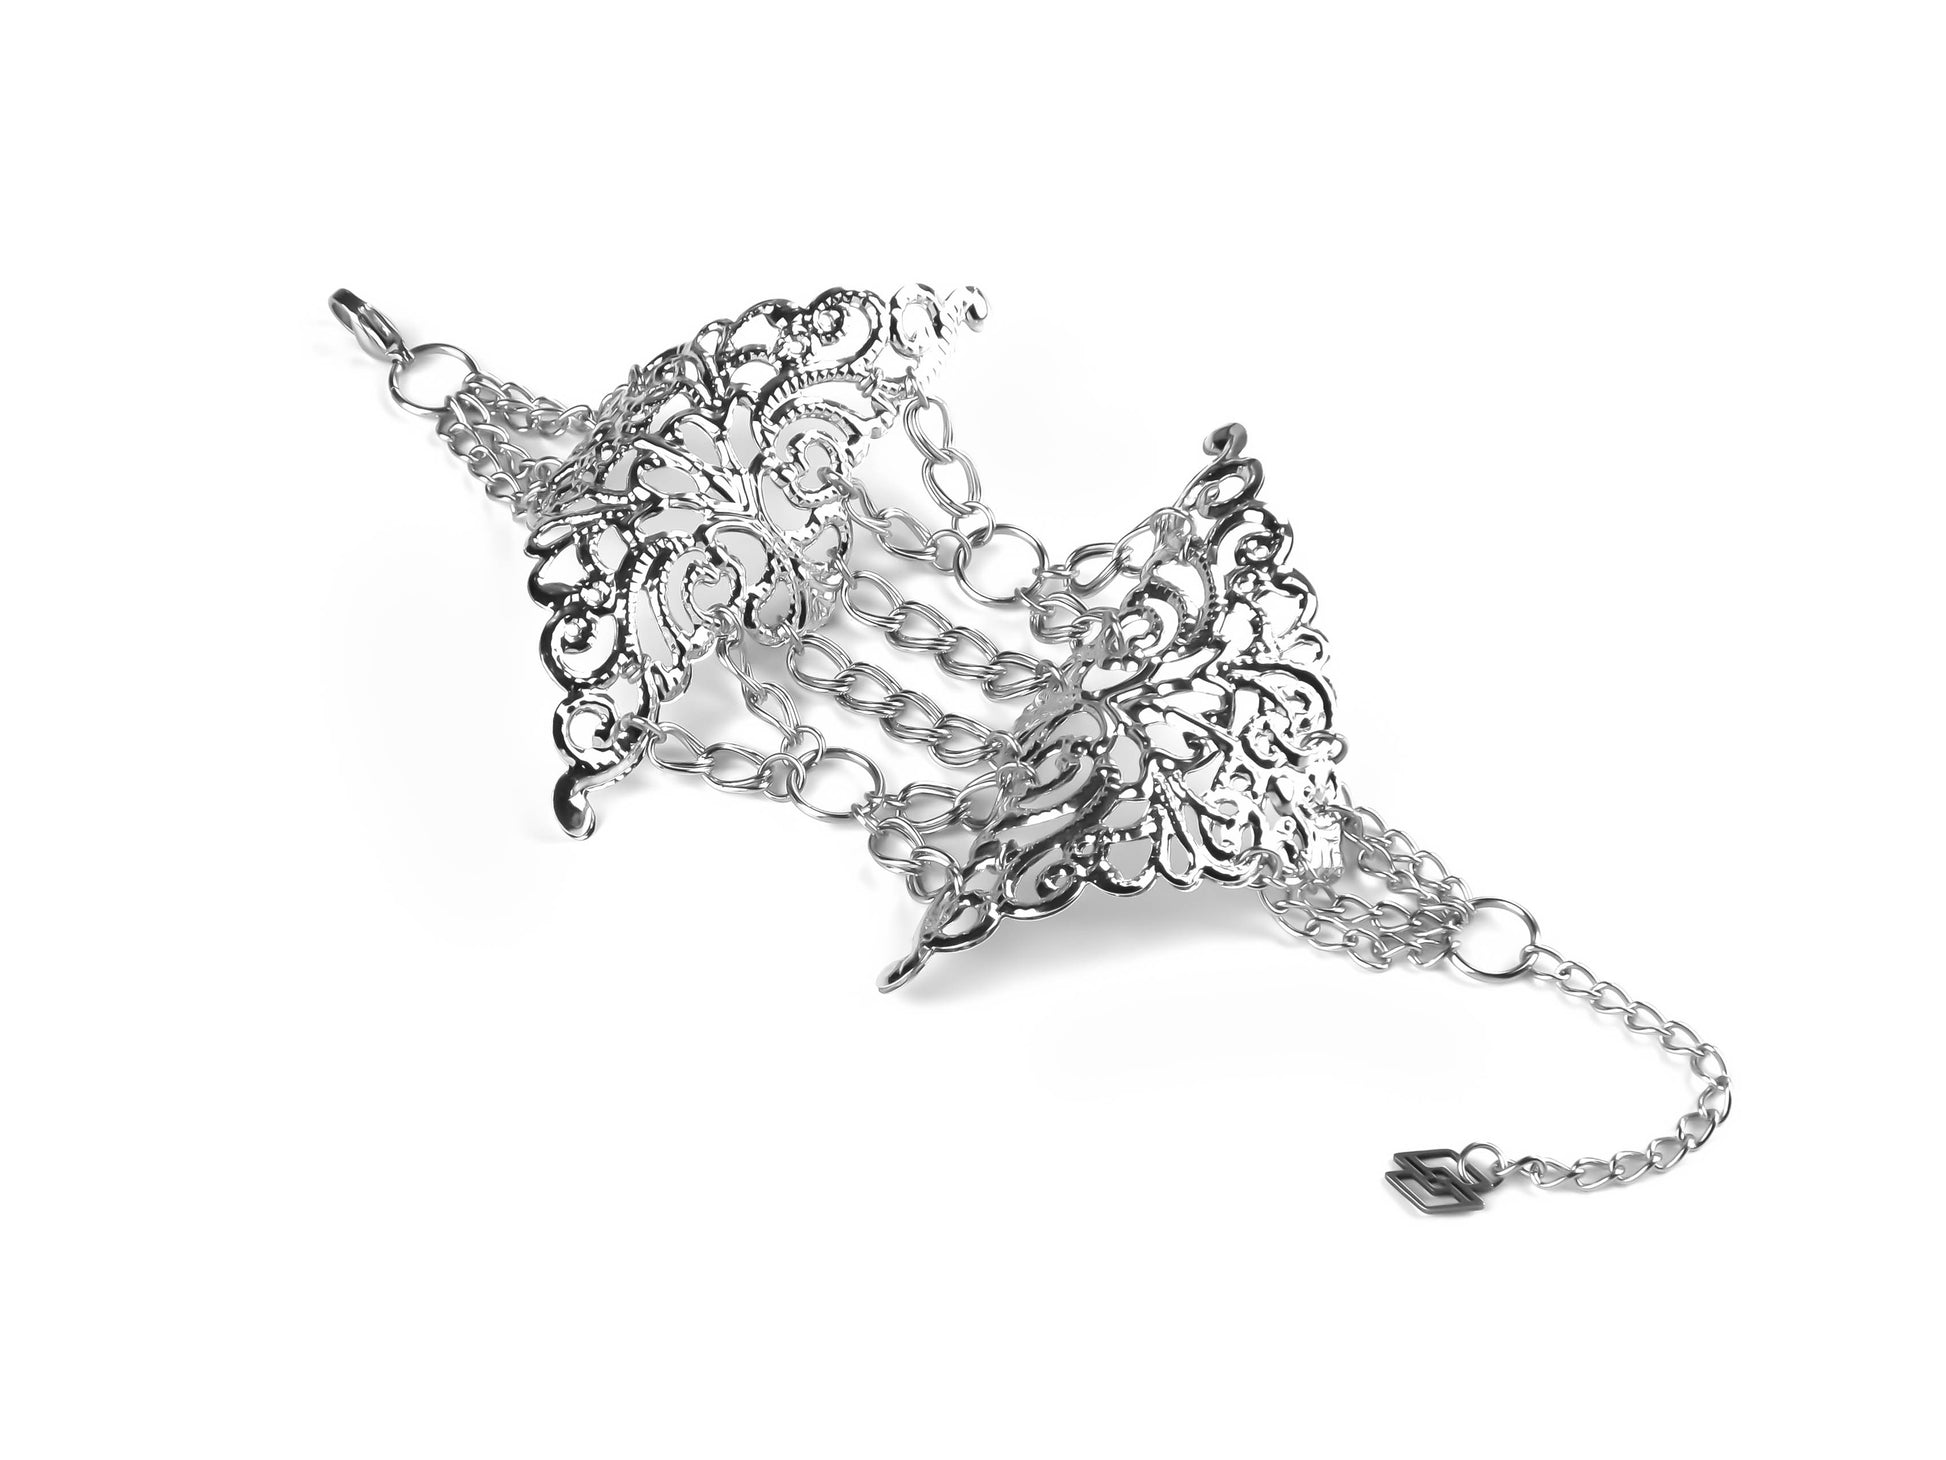 Intricately designed Myril Jewels gothic bracelet featuring detailed silver metal lace patterns and delicate chains, ideal for accessorizing a dark-avantgarde look.